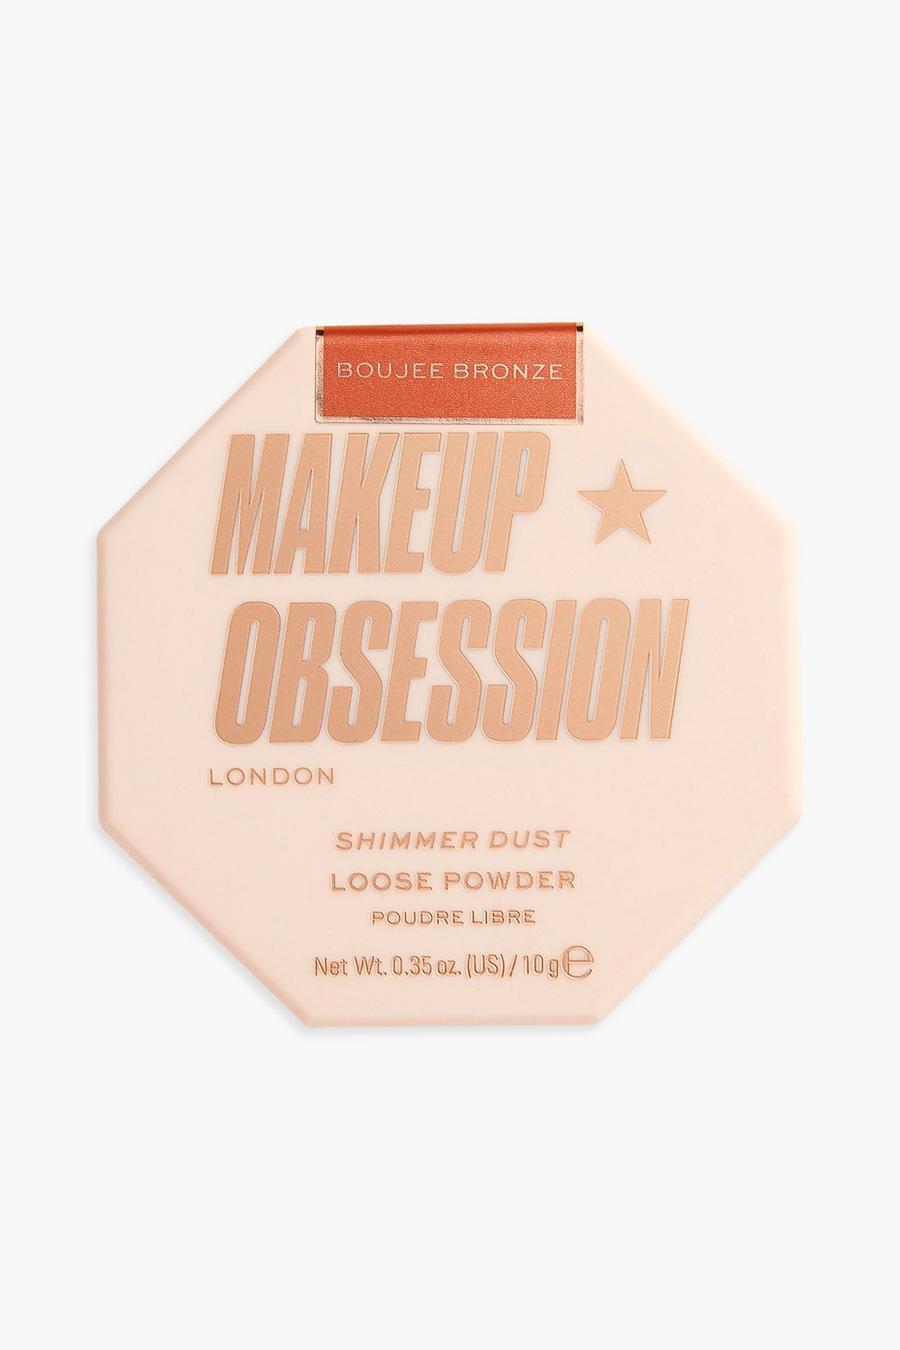 Multi multicolor Makeup Obsession Shimmer Dust Boujee Bronze